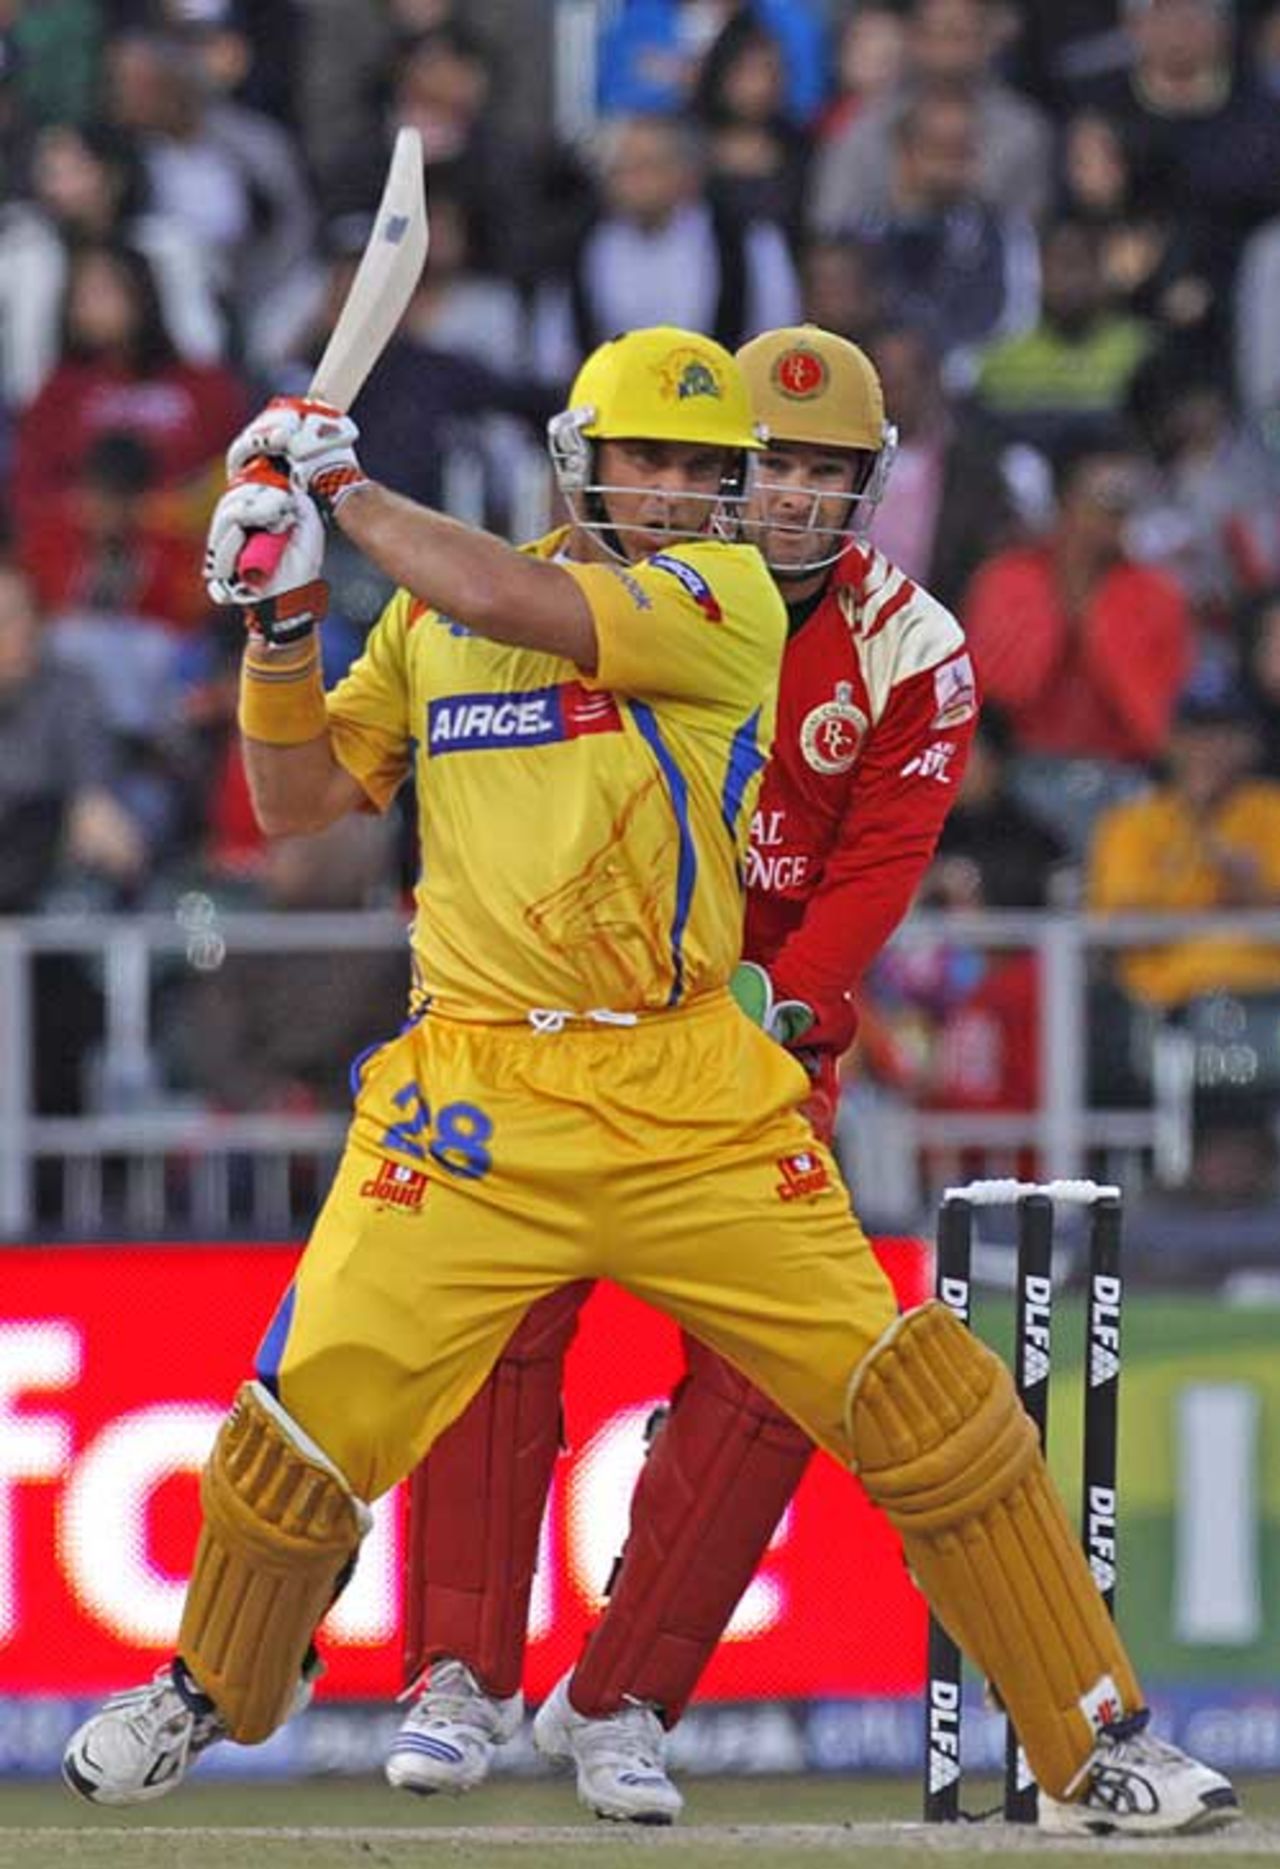 Matthew Hayden goes back to force the ball away, Bangalore Royal Challengers v Chennai Super Kings, IPL, second semi-final, Johannesburg, May 23, 2009